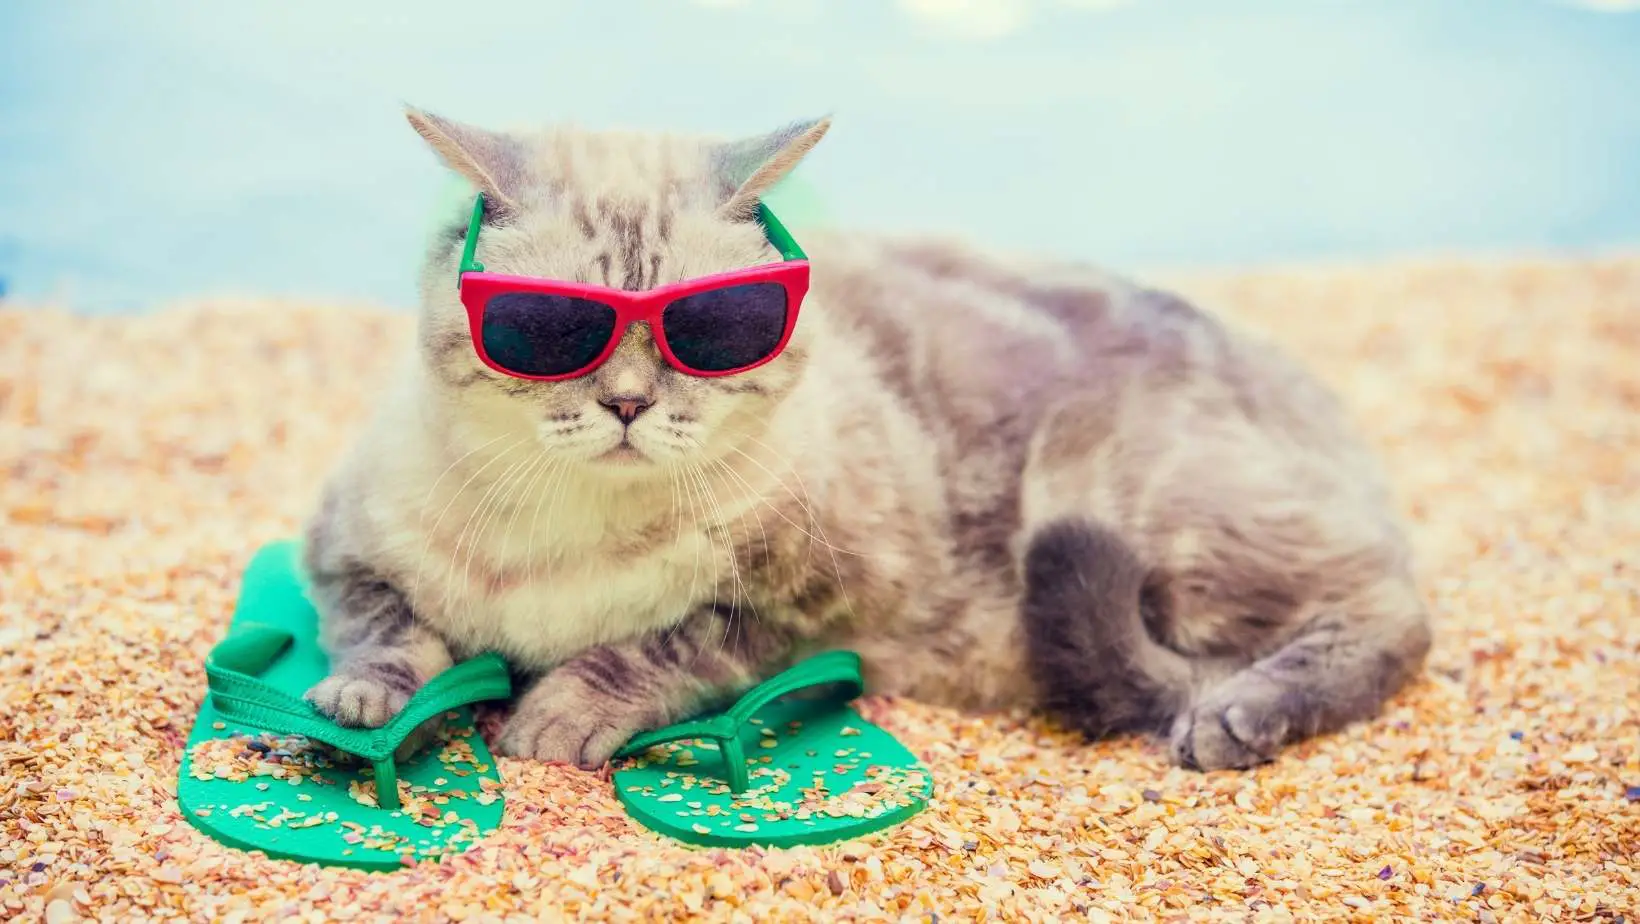 Do Cats Eat Less in Summer?